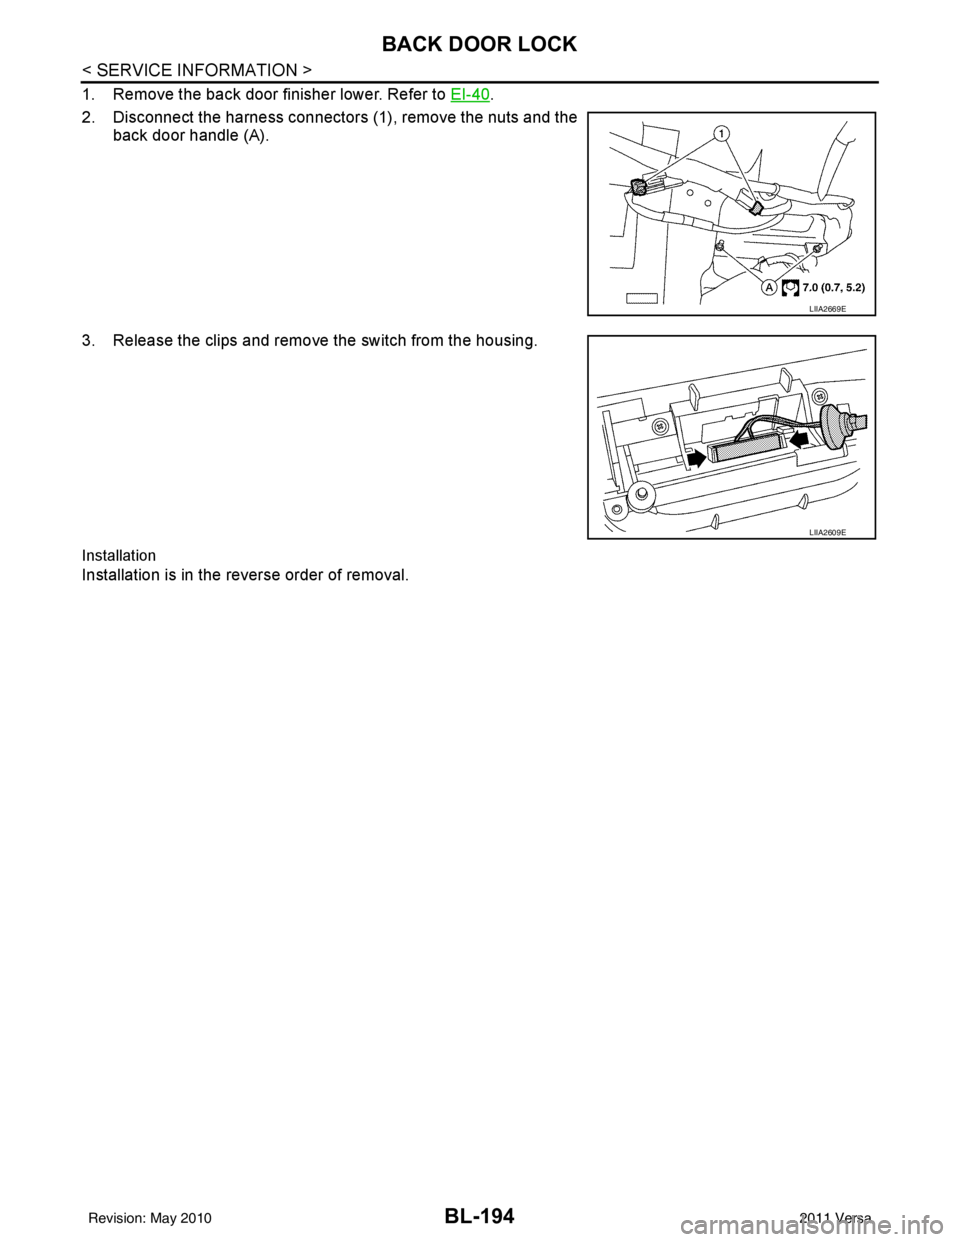 NISSAN LATIO 2011  Service Repair Manual BL-194
< SERVICE INFORMATION >
BACK DOOR LOCK
1. Remove the back door finisher lower. Refer to EI-40.
2. Disconnect the harness connectors (1), remove the nuts and the back door handle (A).
3. Release